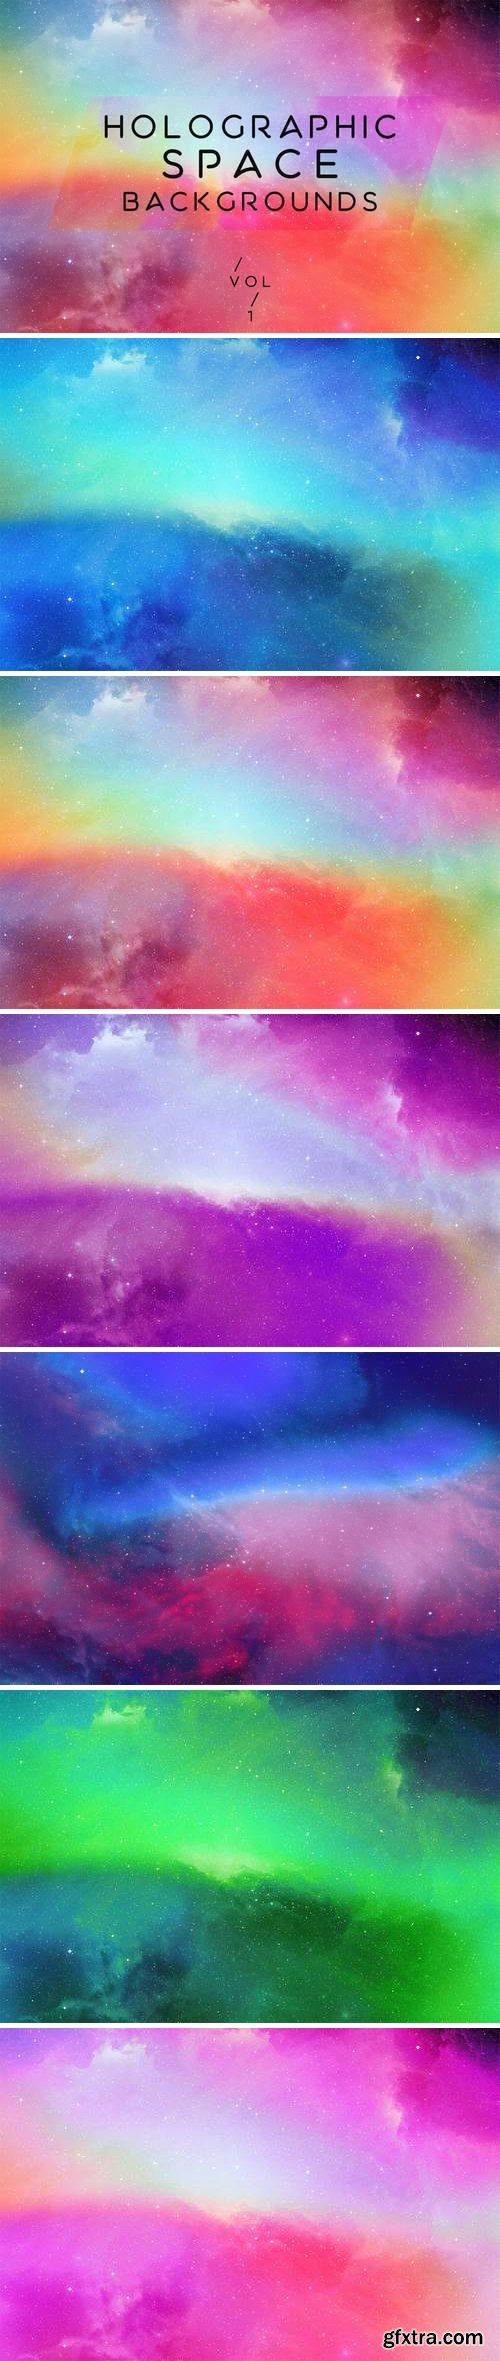 Holographic Space Backgrounds Vol.1